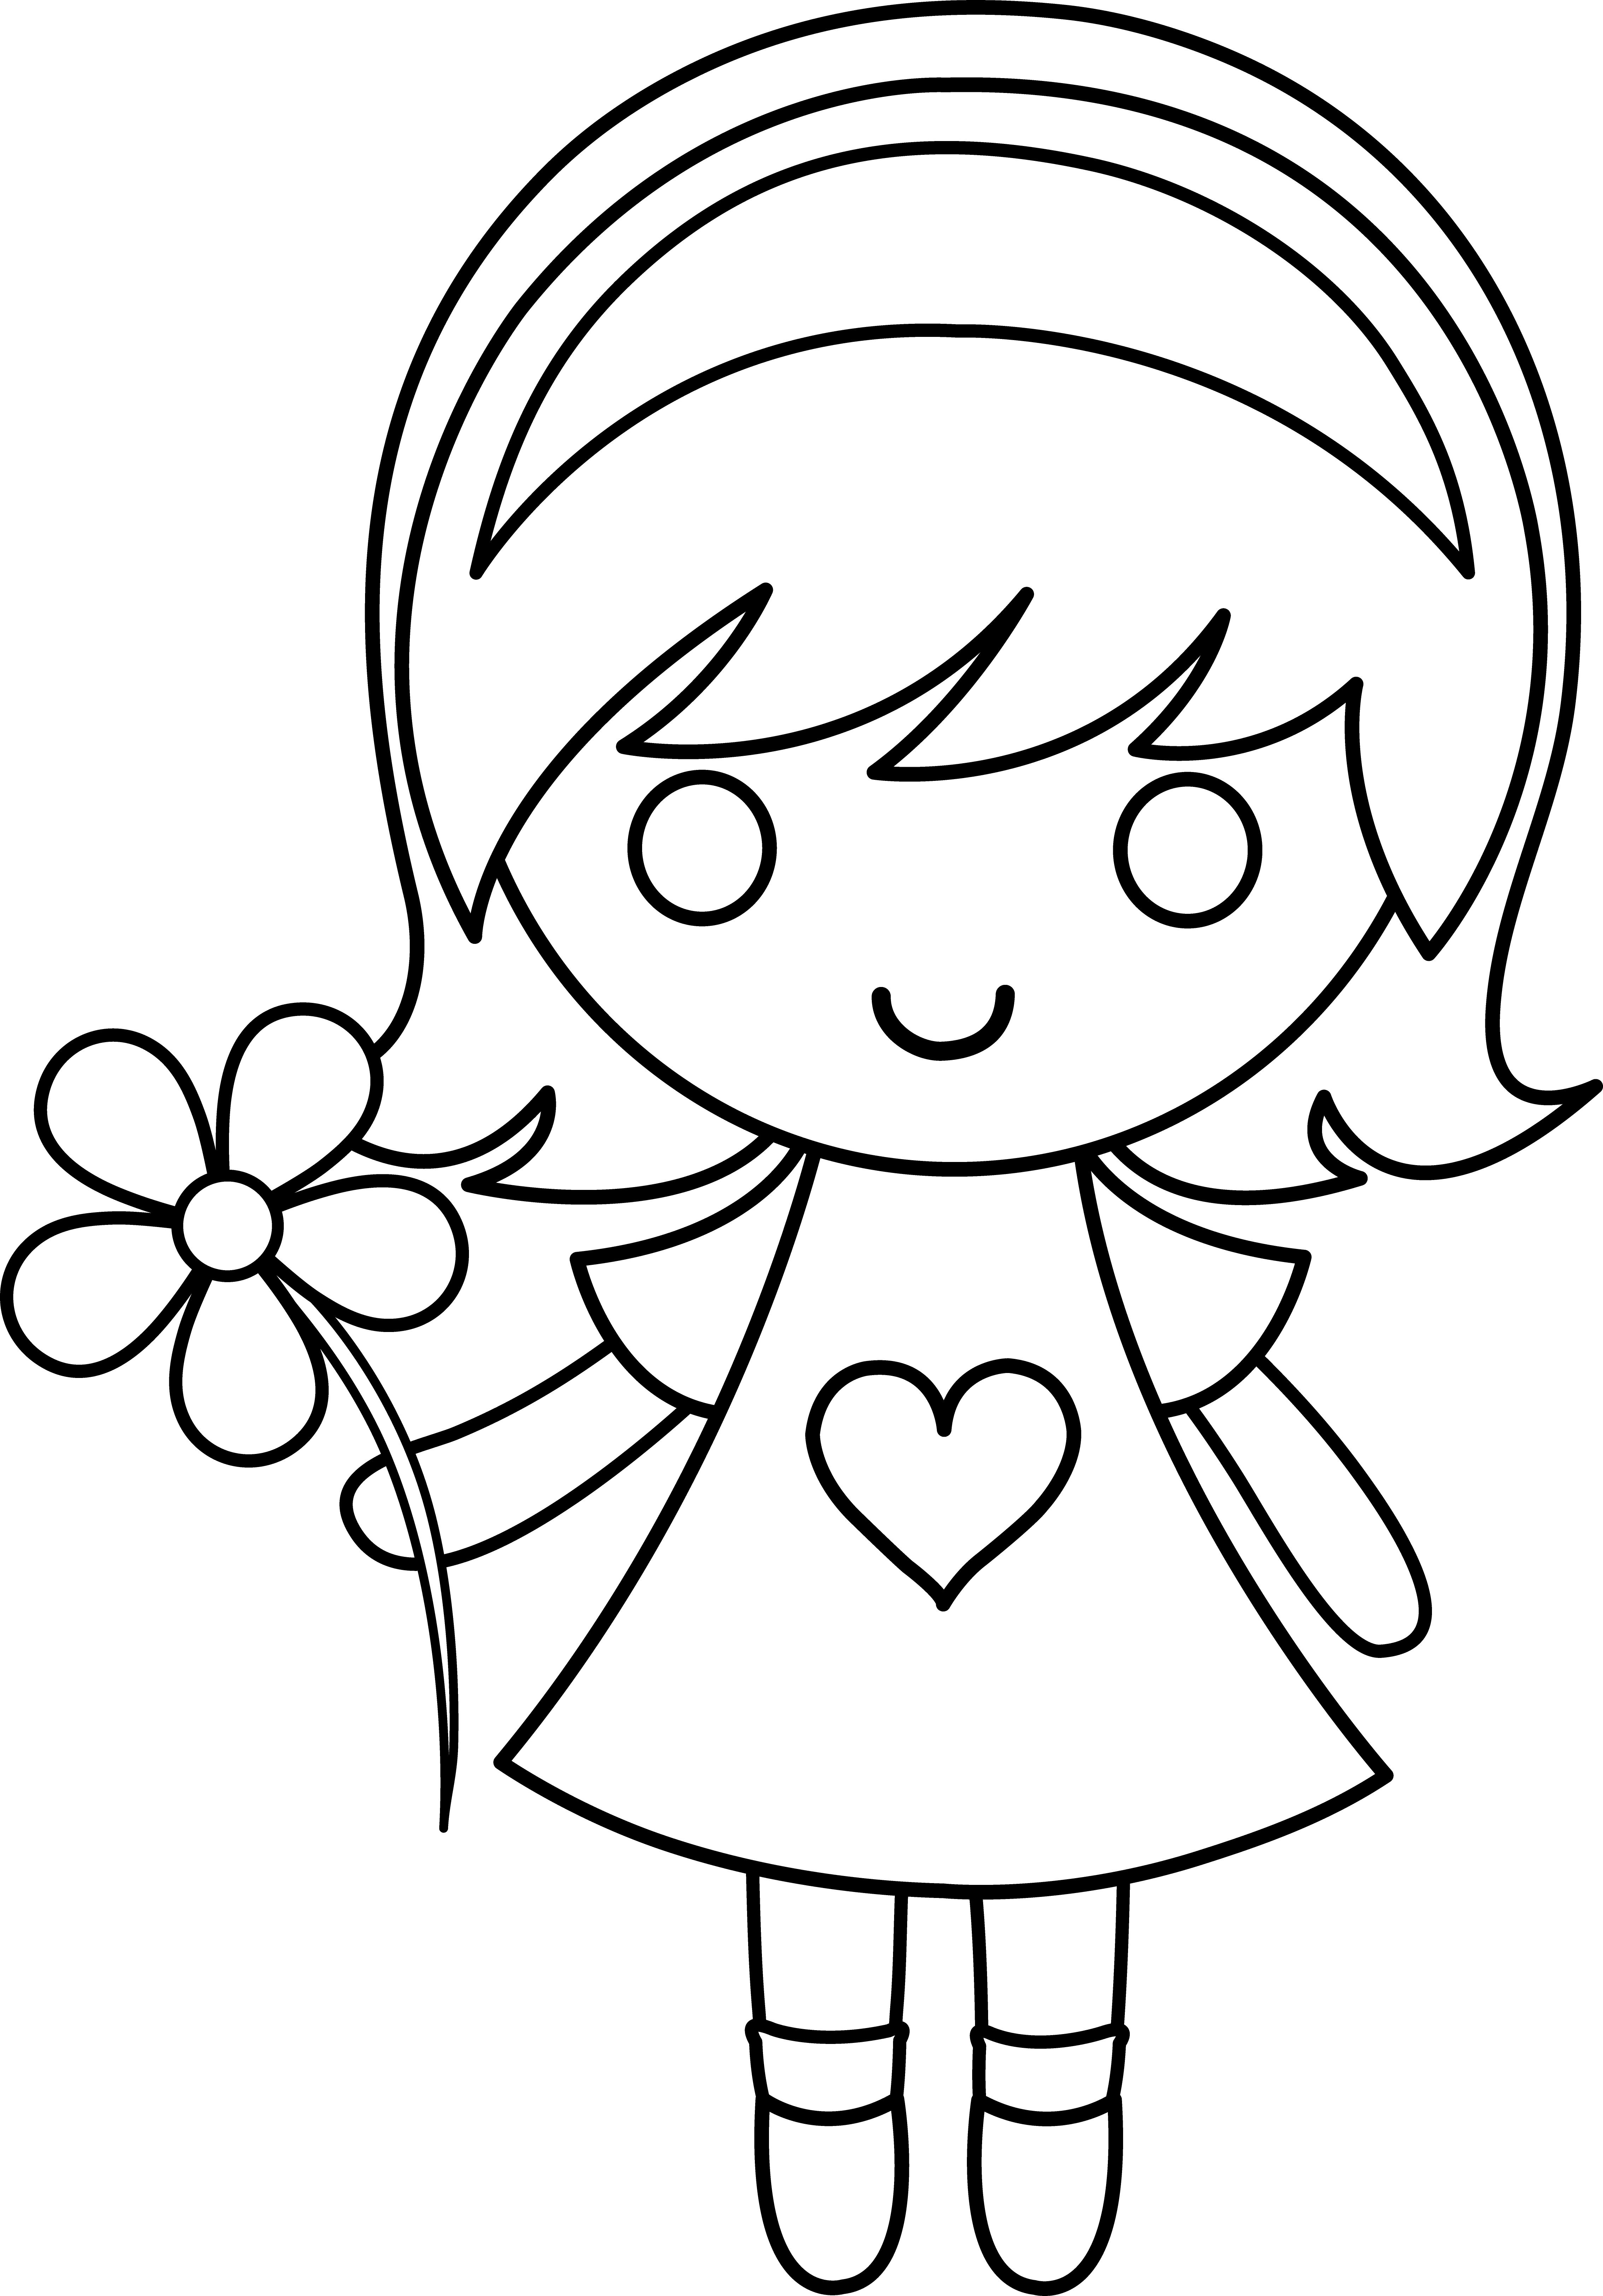 Thermometer clip art coloring page. Daisy girl colorable line